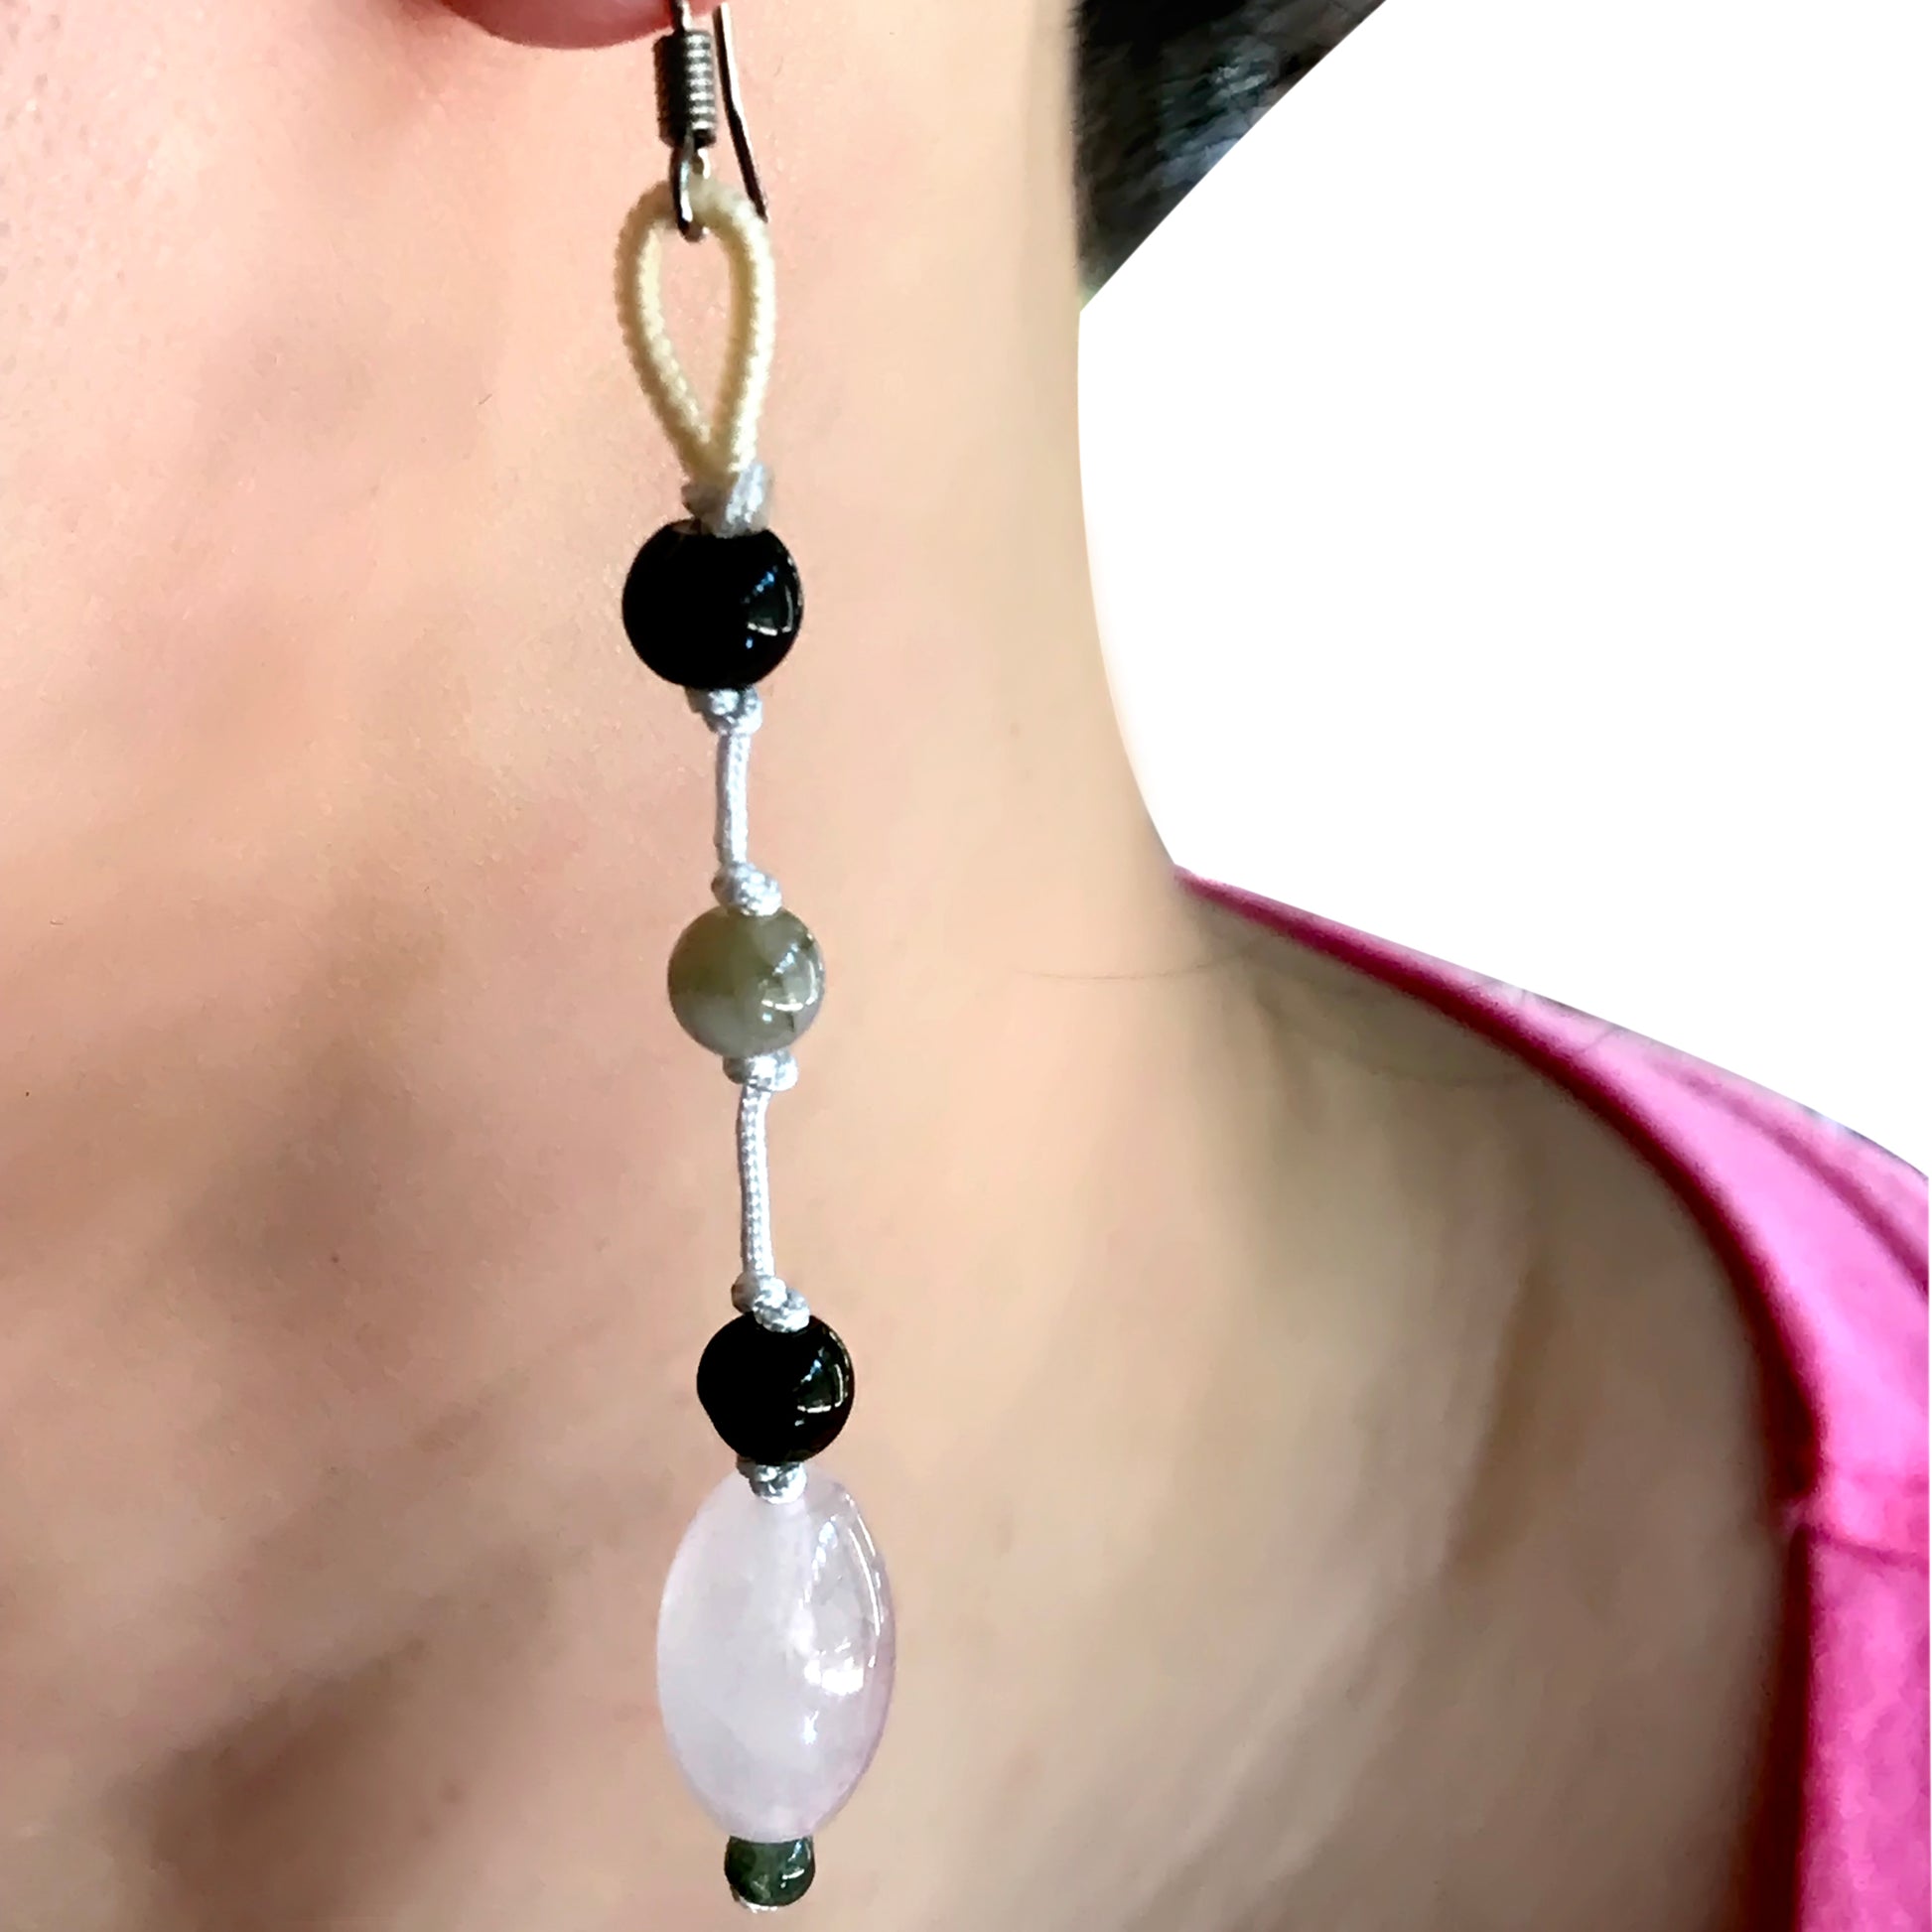 Add some Sparkle to Your Look with Cute Oblong Rose Quartz Earrings made with White Cord